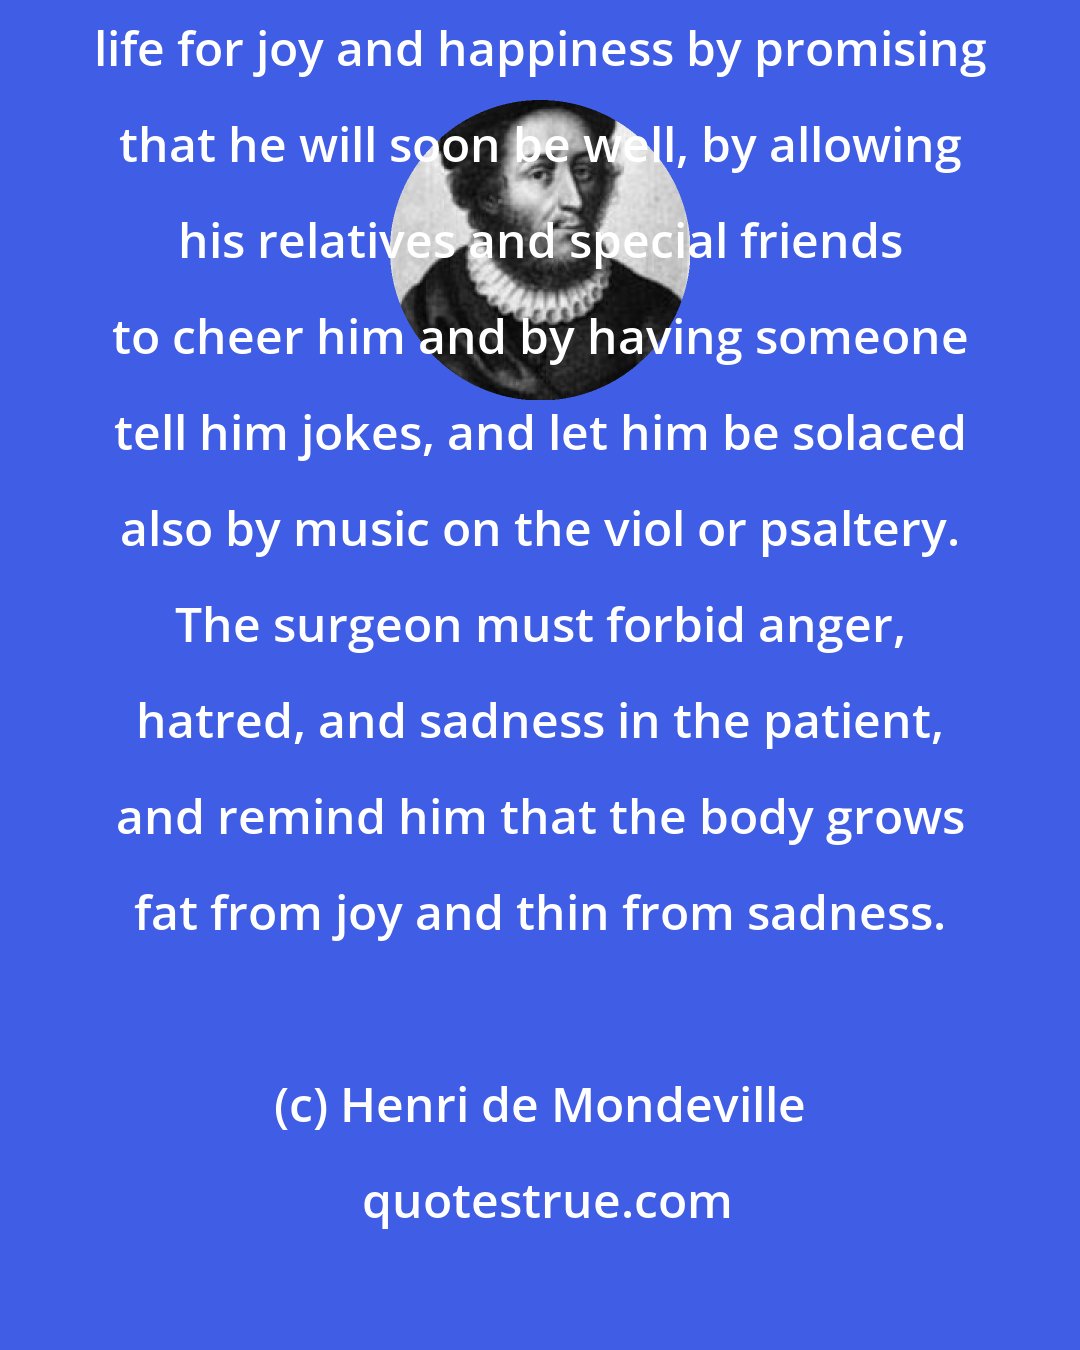 Henri de Mondeville: Let the surgeon take care to regulate the whole regimen of the patient's life for joy and happiness by promising that he will soon be well, by allowing his relatives and special friends to cheer him and by having someone tell him jokes, and let him be solaced also by music on the viol or psaltery. The surgeon must forbid anger, hatred, and sadness in the patient, and remind him that the body grows fat from joy and thin from sadness.